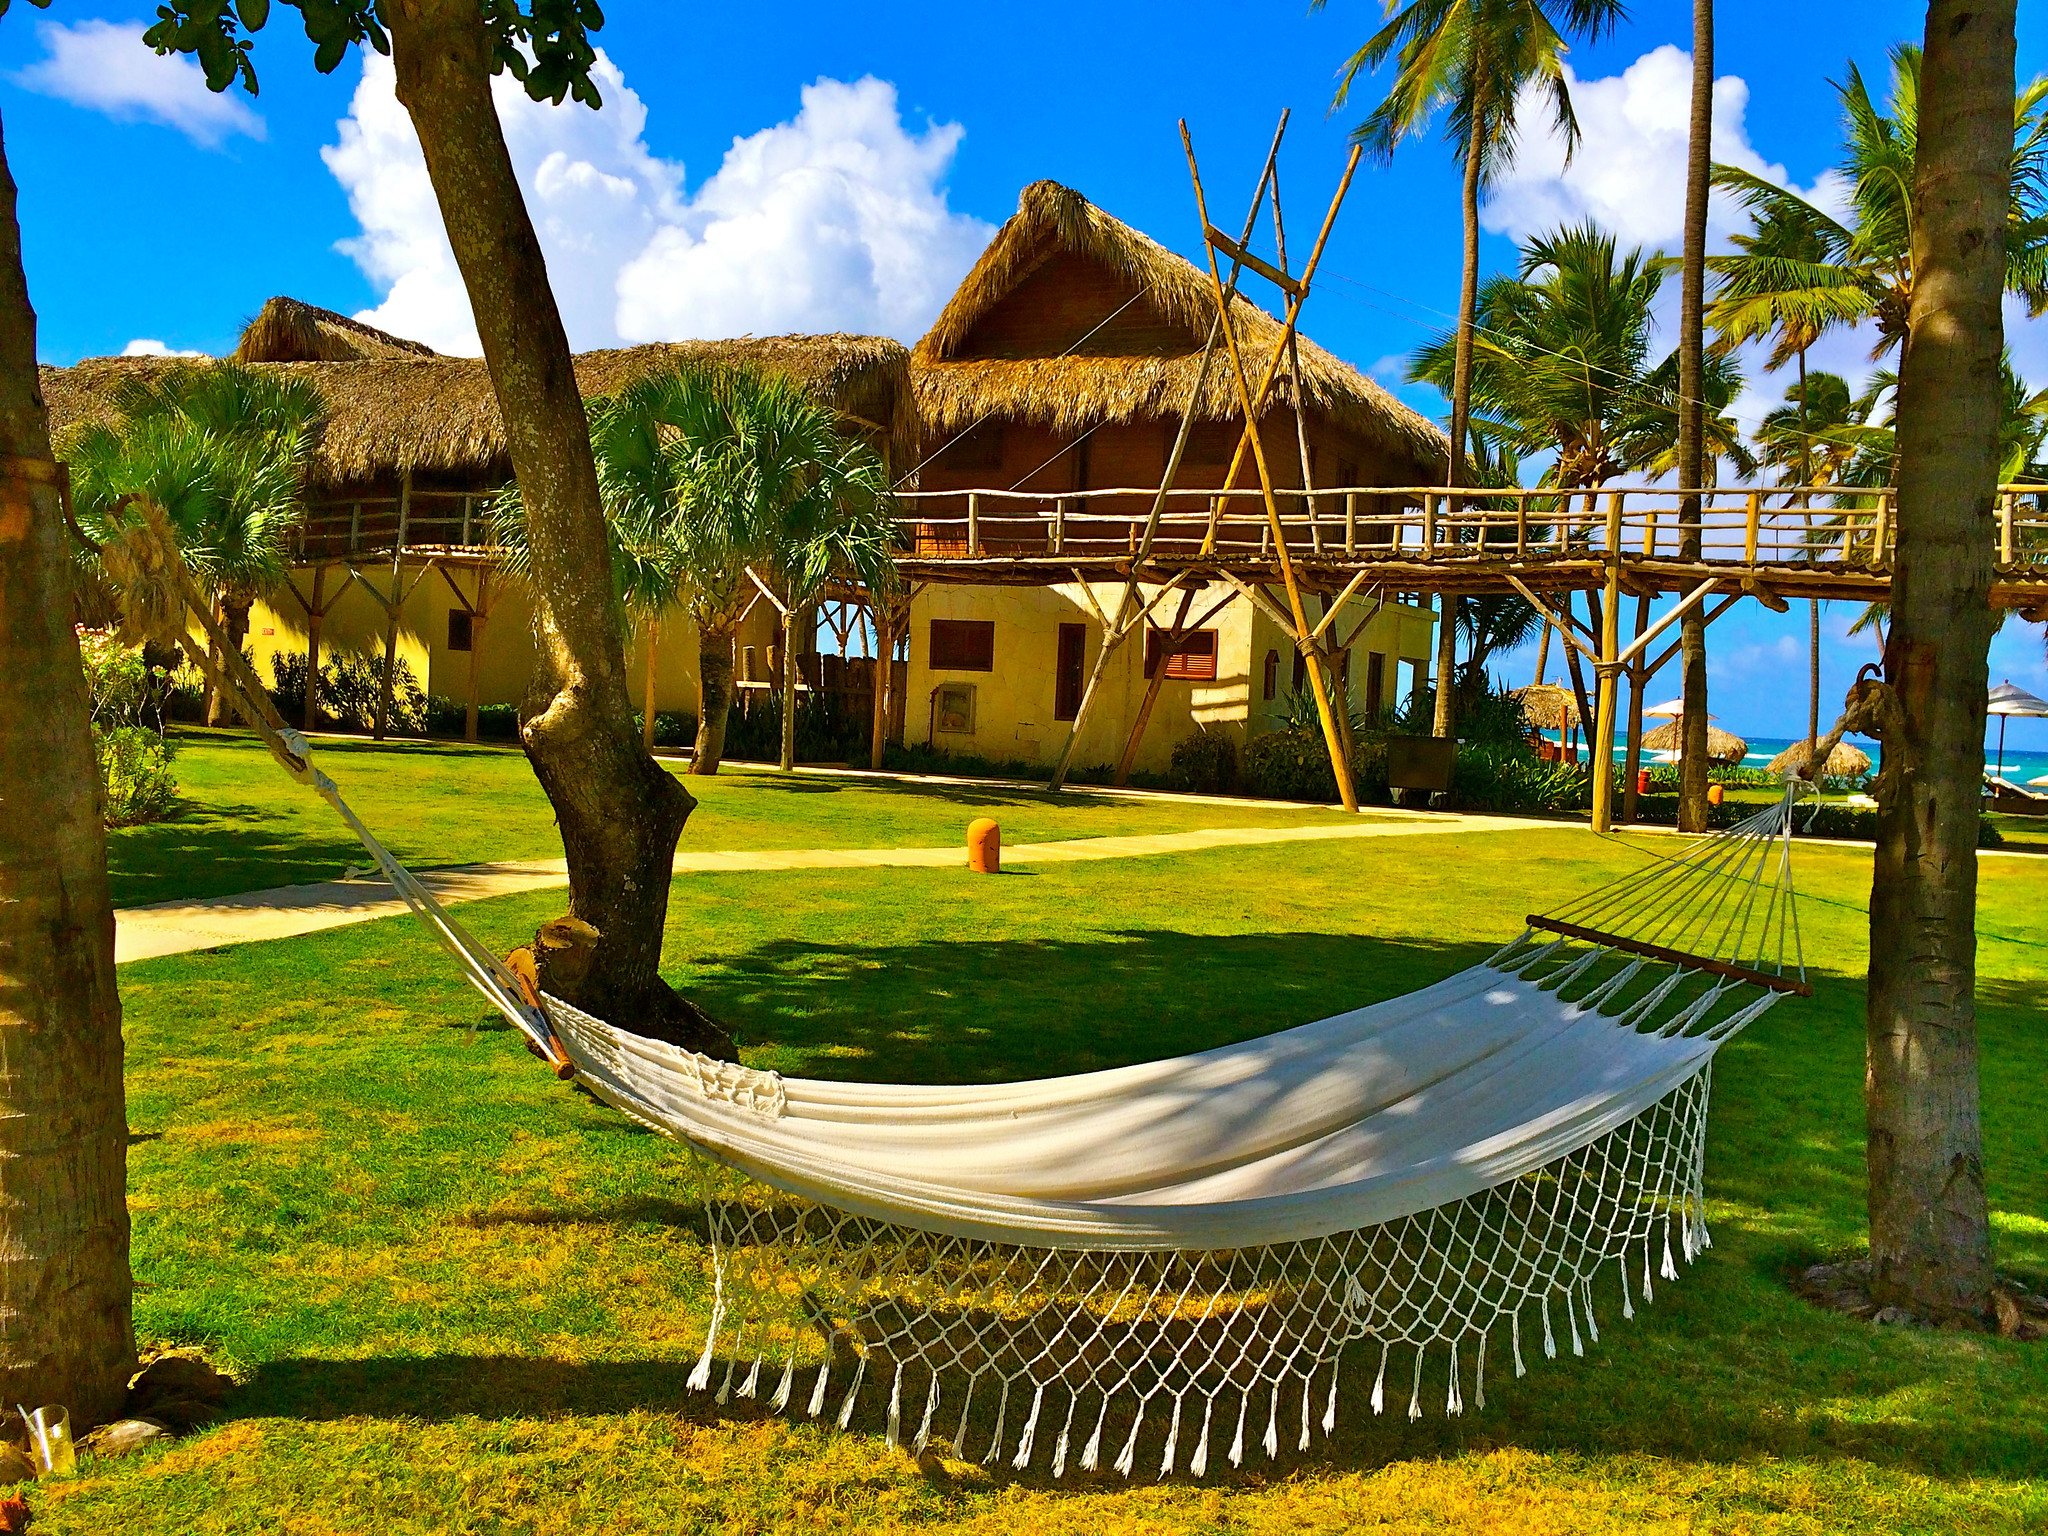 A hammock supported by two trees and native huts with green lawn in Zoetry Agua Punta Cana, one of the best all-inclusive resorts in Punta Cana